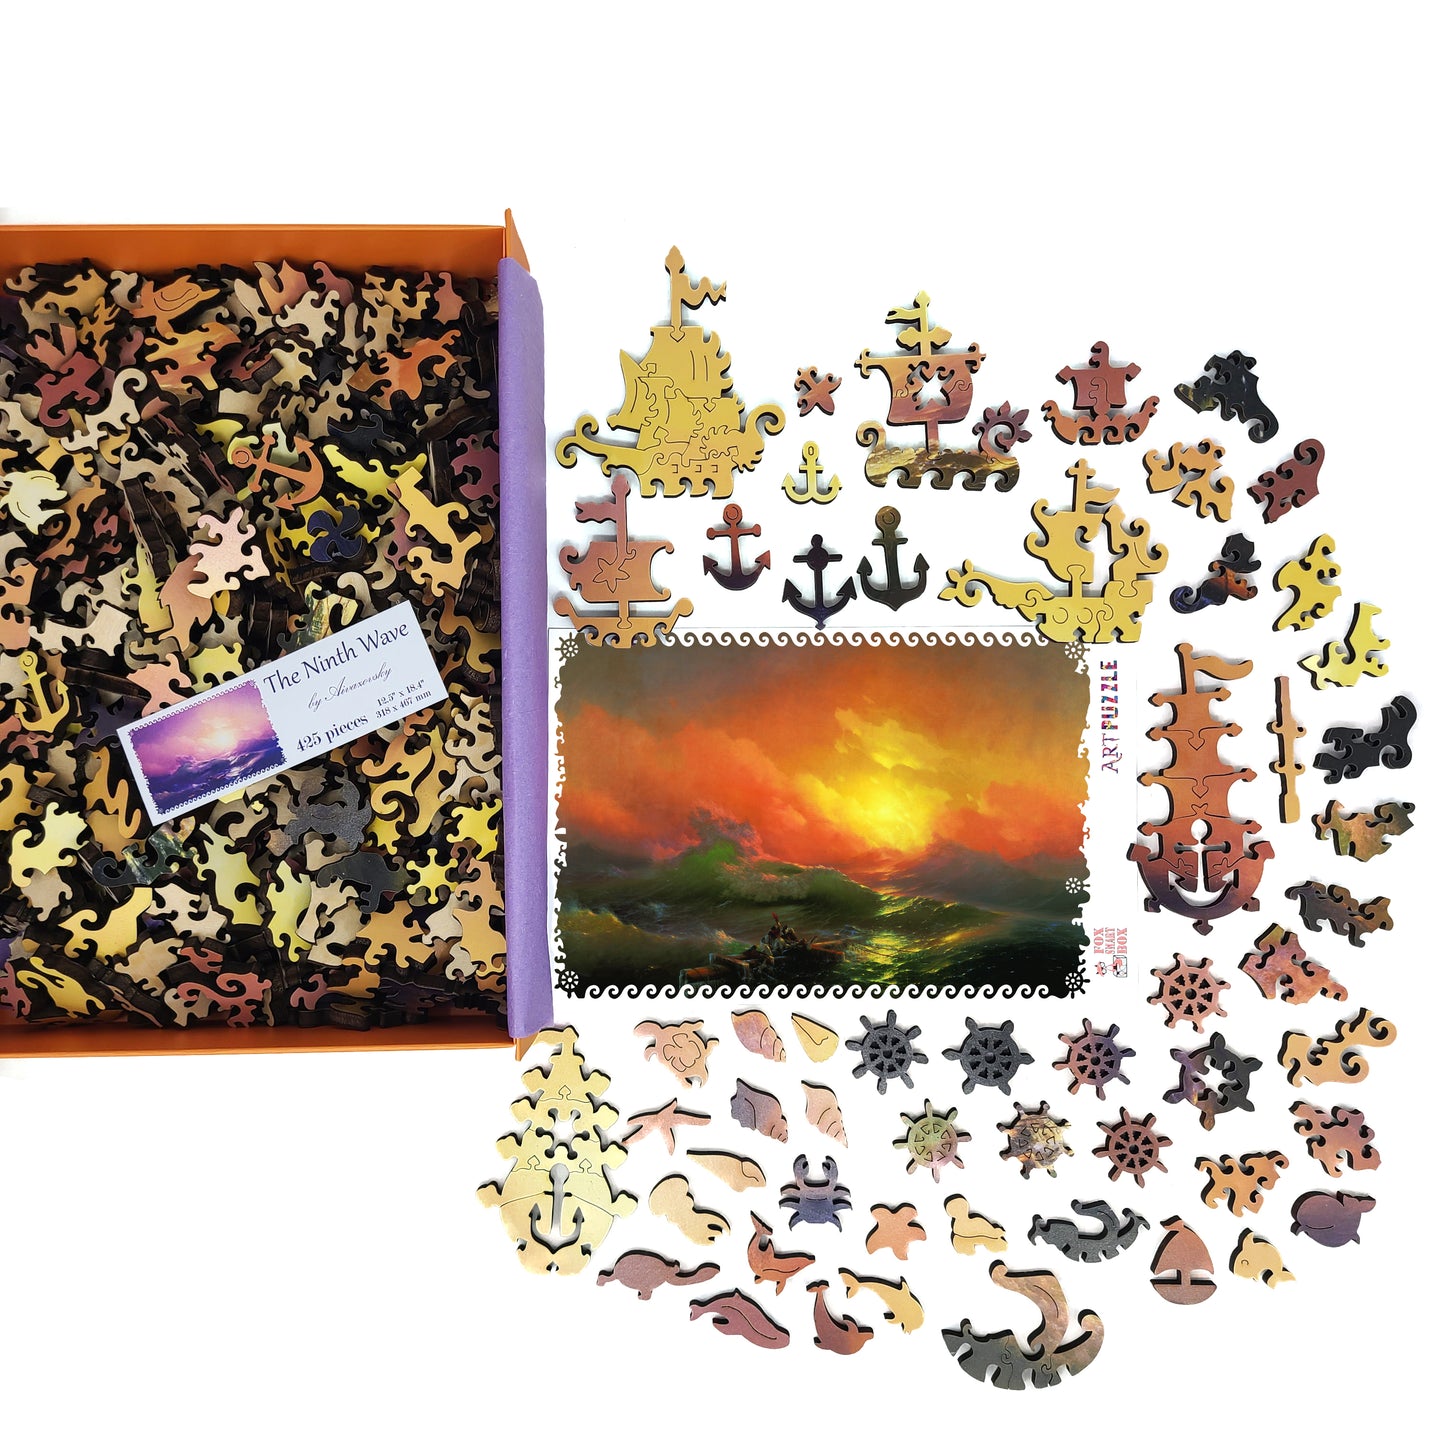 Wooden Jigsaw Puzzle with Uniquely Shaped Pieces for Adults - 425 Pieces - The Ninth Wave (digitally enhanced)